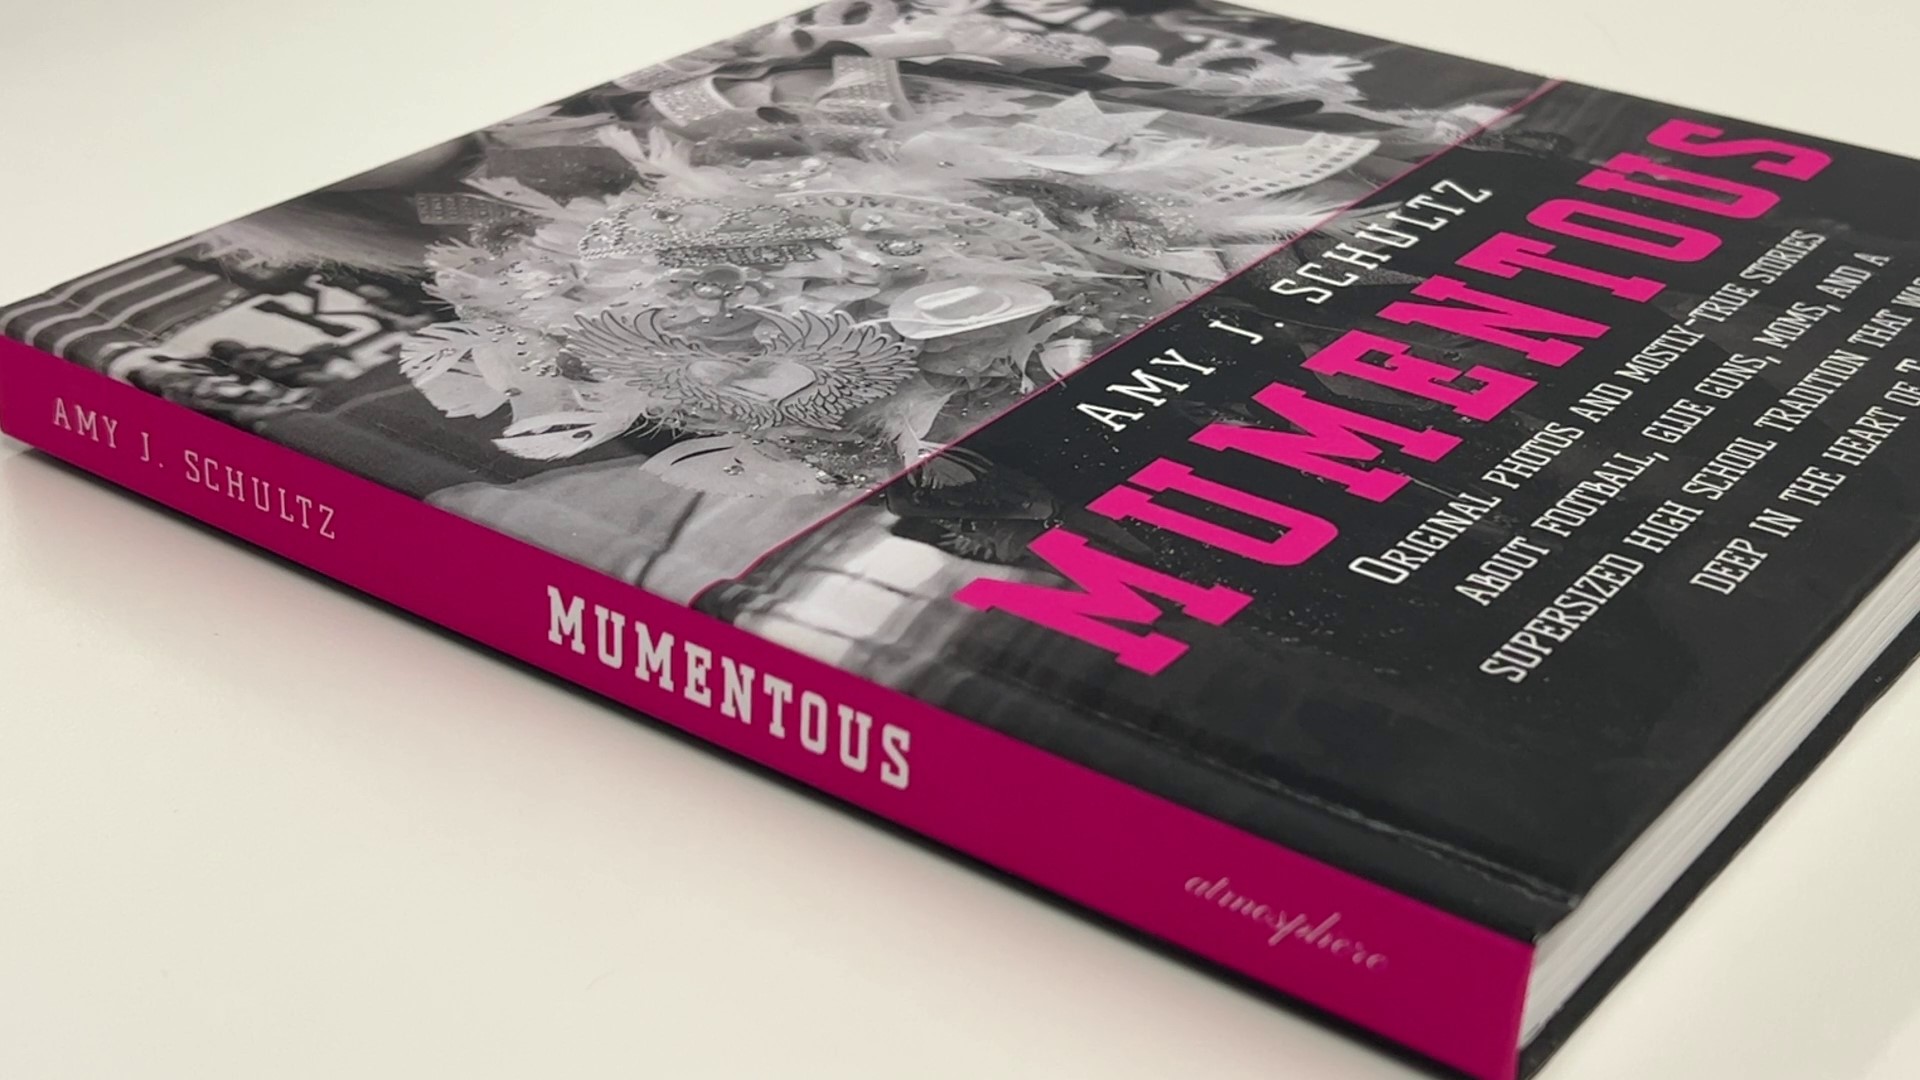 Amy Schultz literally wrote the book on homecoming mums and now the photography and history uncovered in 'Mumentous' will be part of a traveling exhibit.